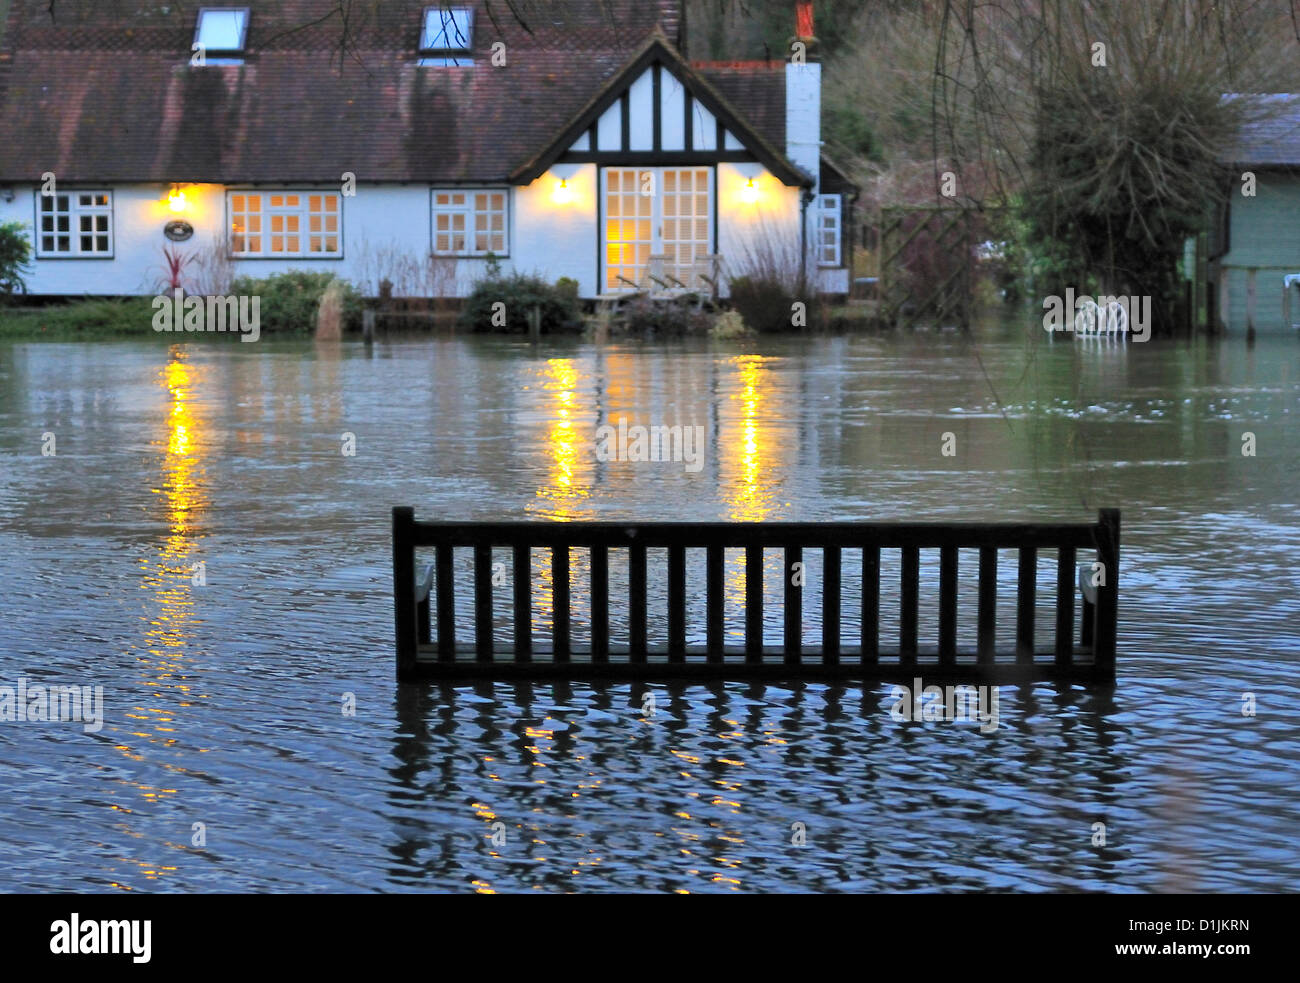 Henley-on-Thames Buckinghamshire   UK   16.00 GMT  20-12-2012 1   Traditional Christmas Day strolls along the Thames side tow path  and feeding the ducks at Mill Meadows ,Henley-on-Thames, thwarted by the rising flood waters (Note  the river Thames is between the bench and the island houses  at Mill Meadow) Stock Photo